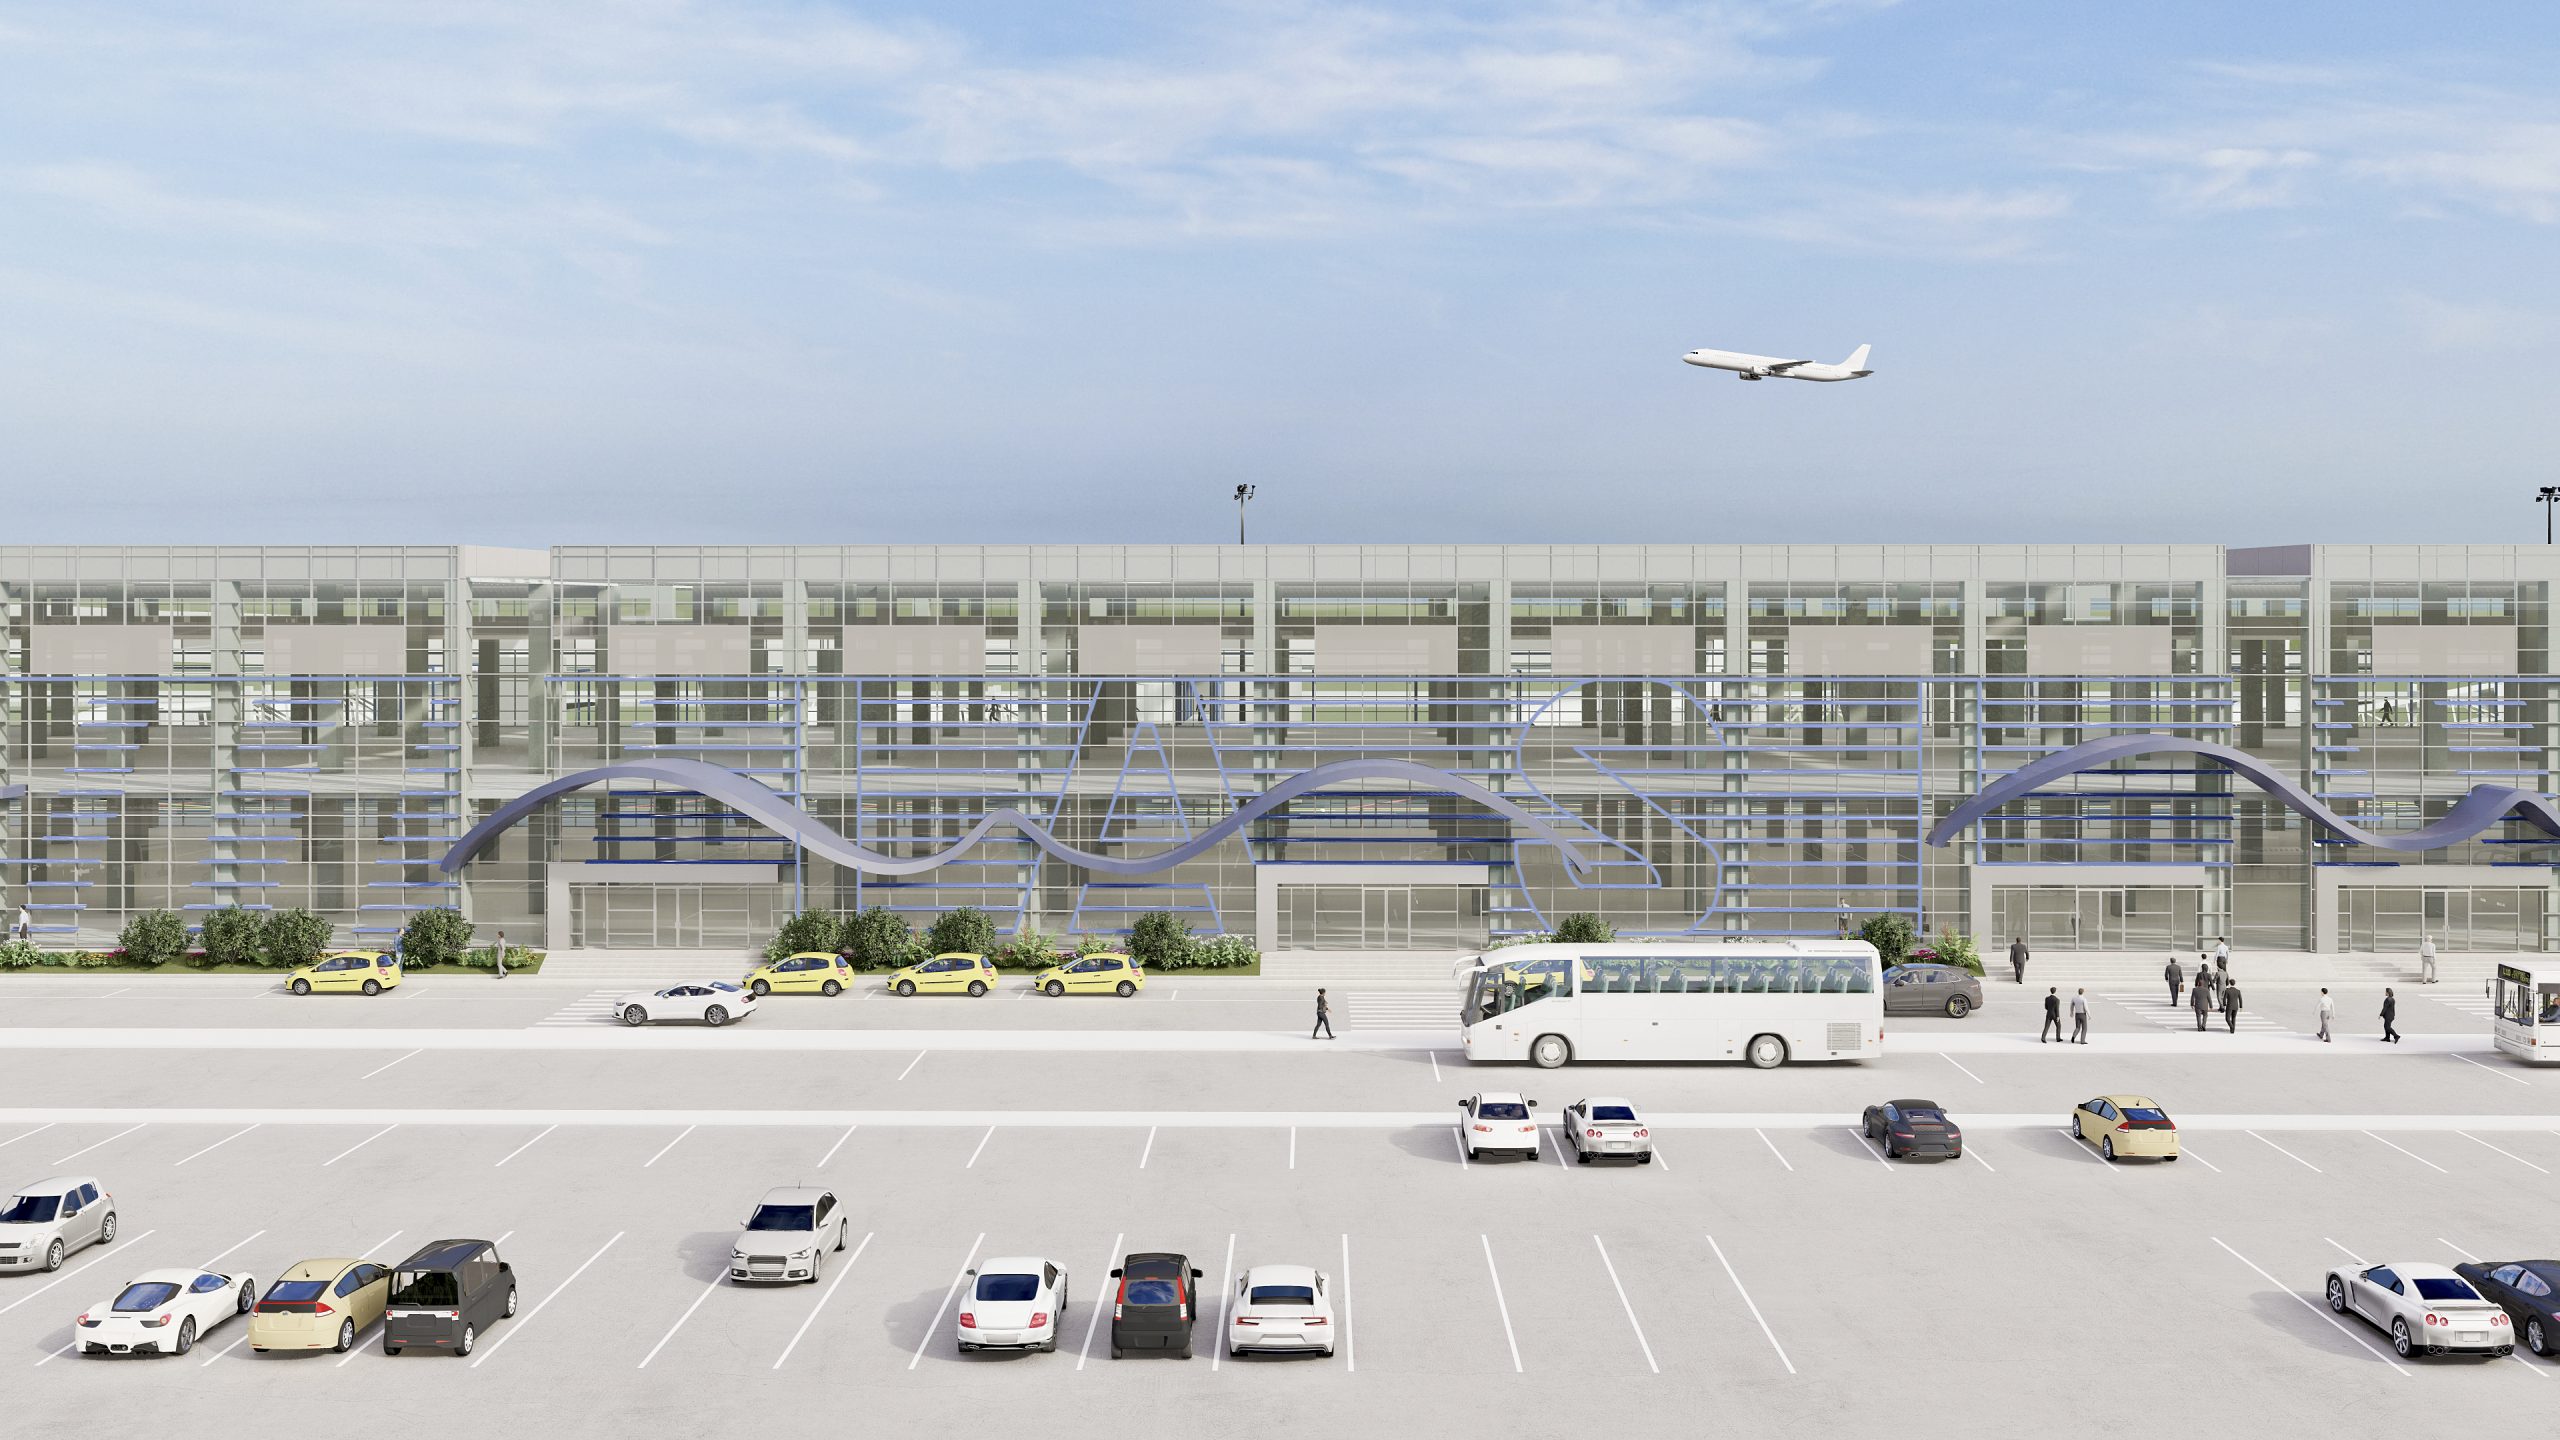 Supervision and site management services for the expansion of passenger terminals and parking facilities at Iasi International Airport